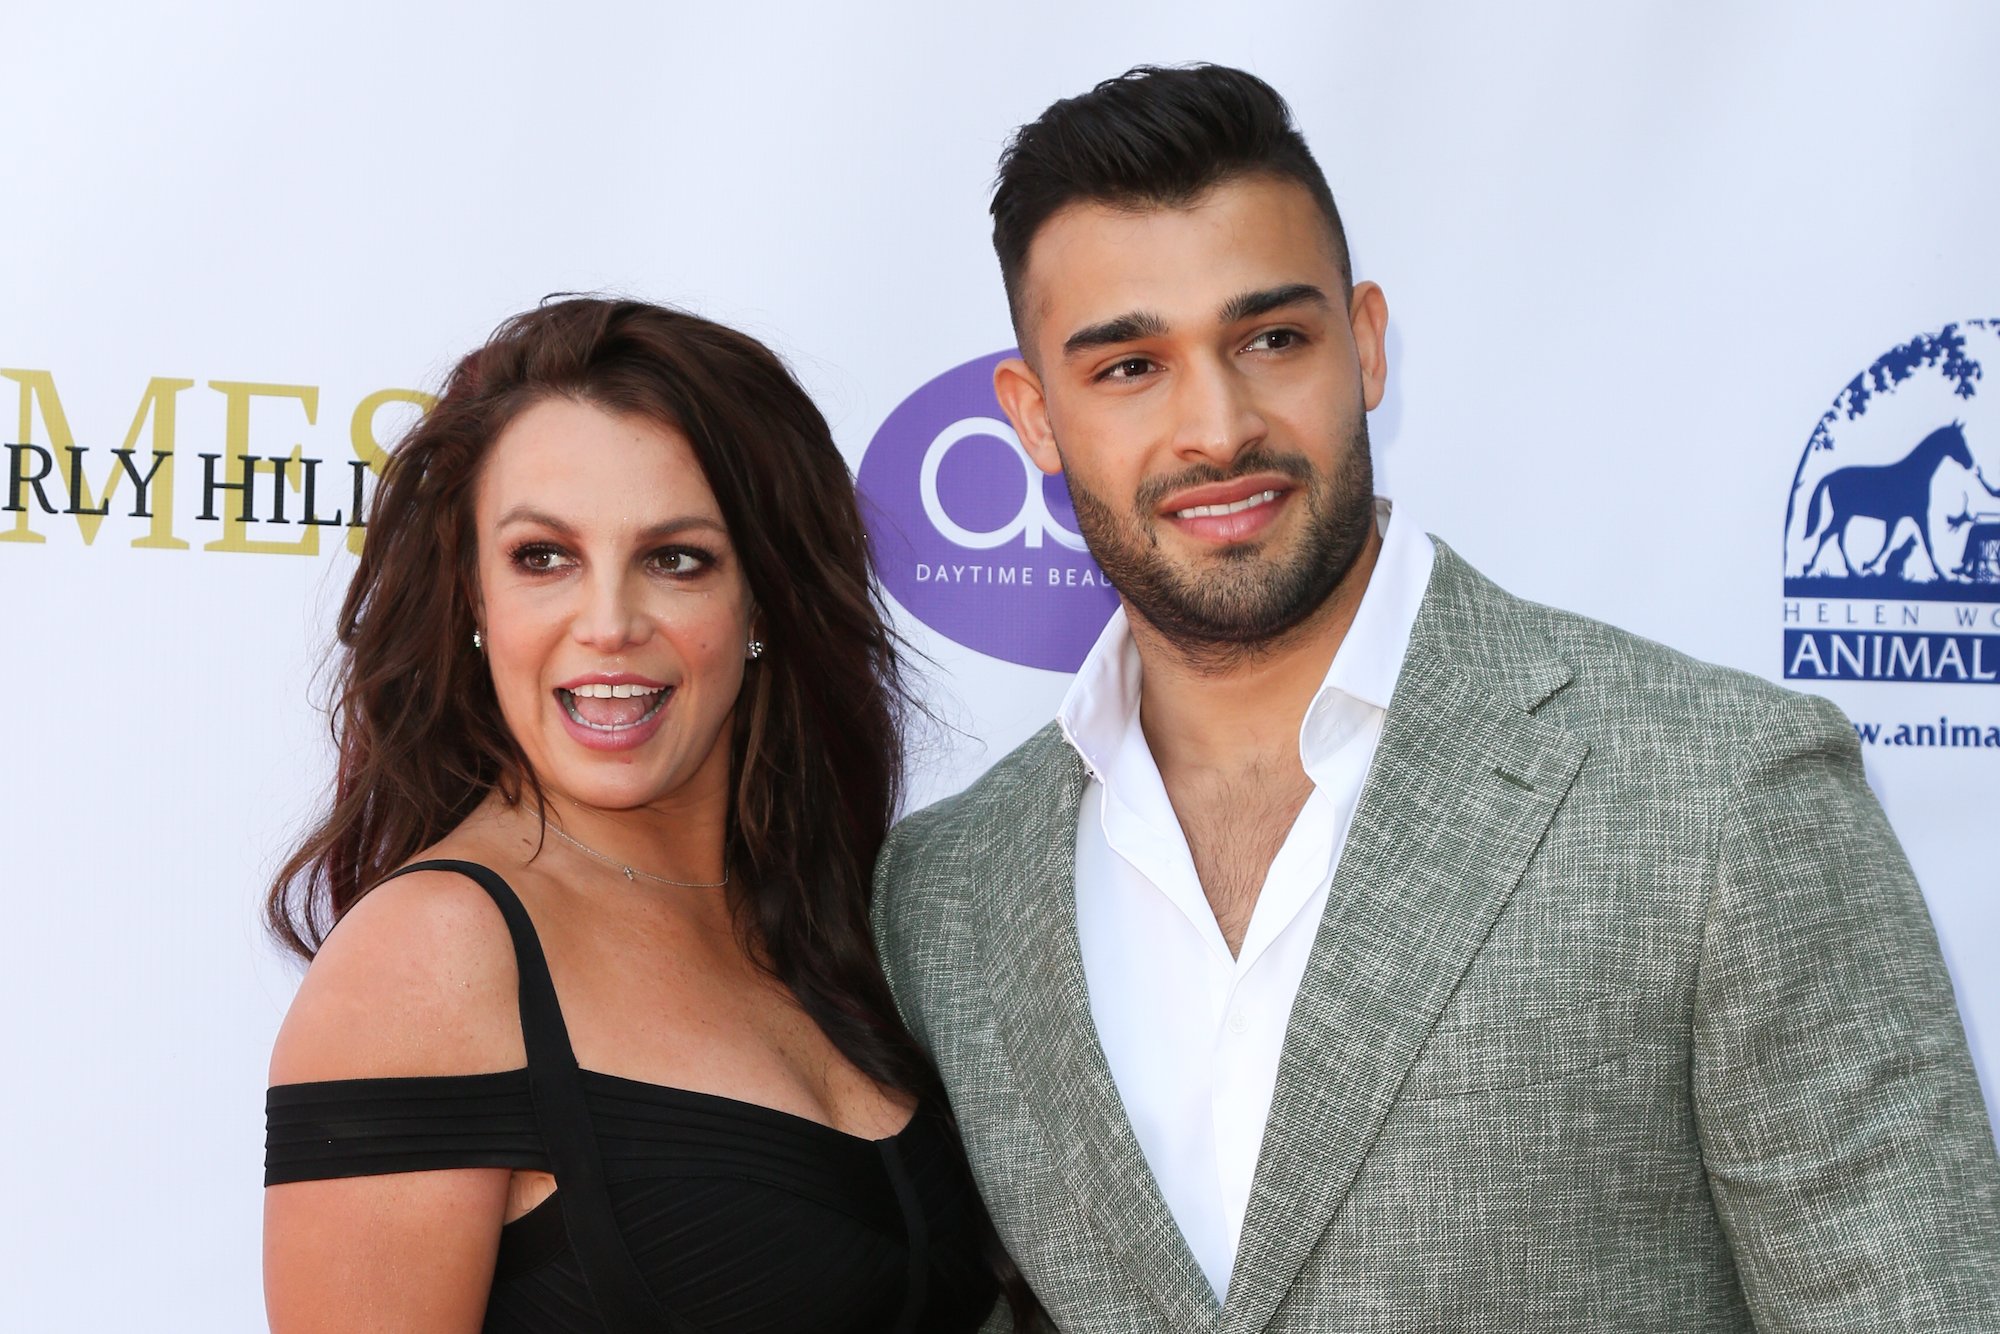 Britney Spears and Sam Asghari attending the 2019 Daytime Beauty Awards